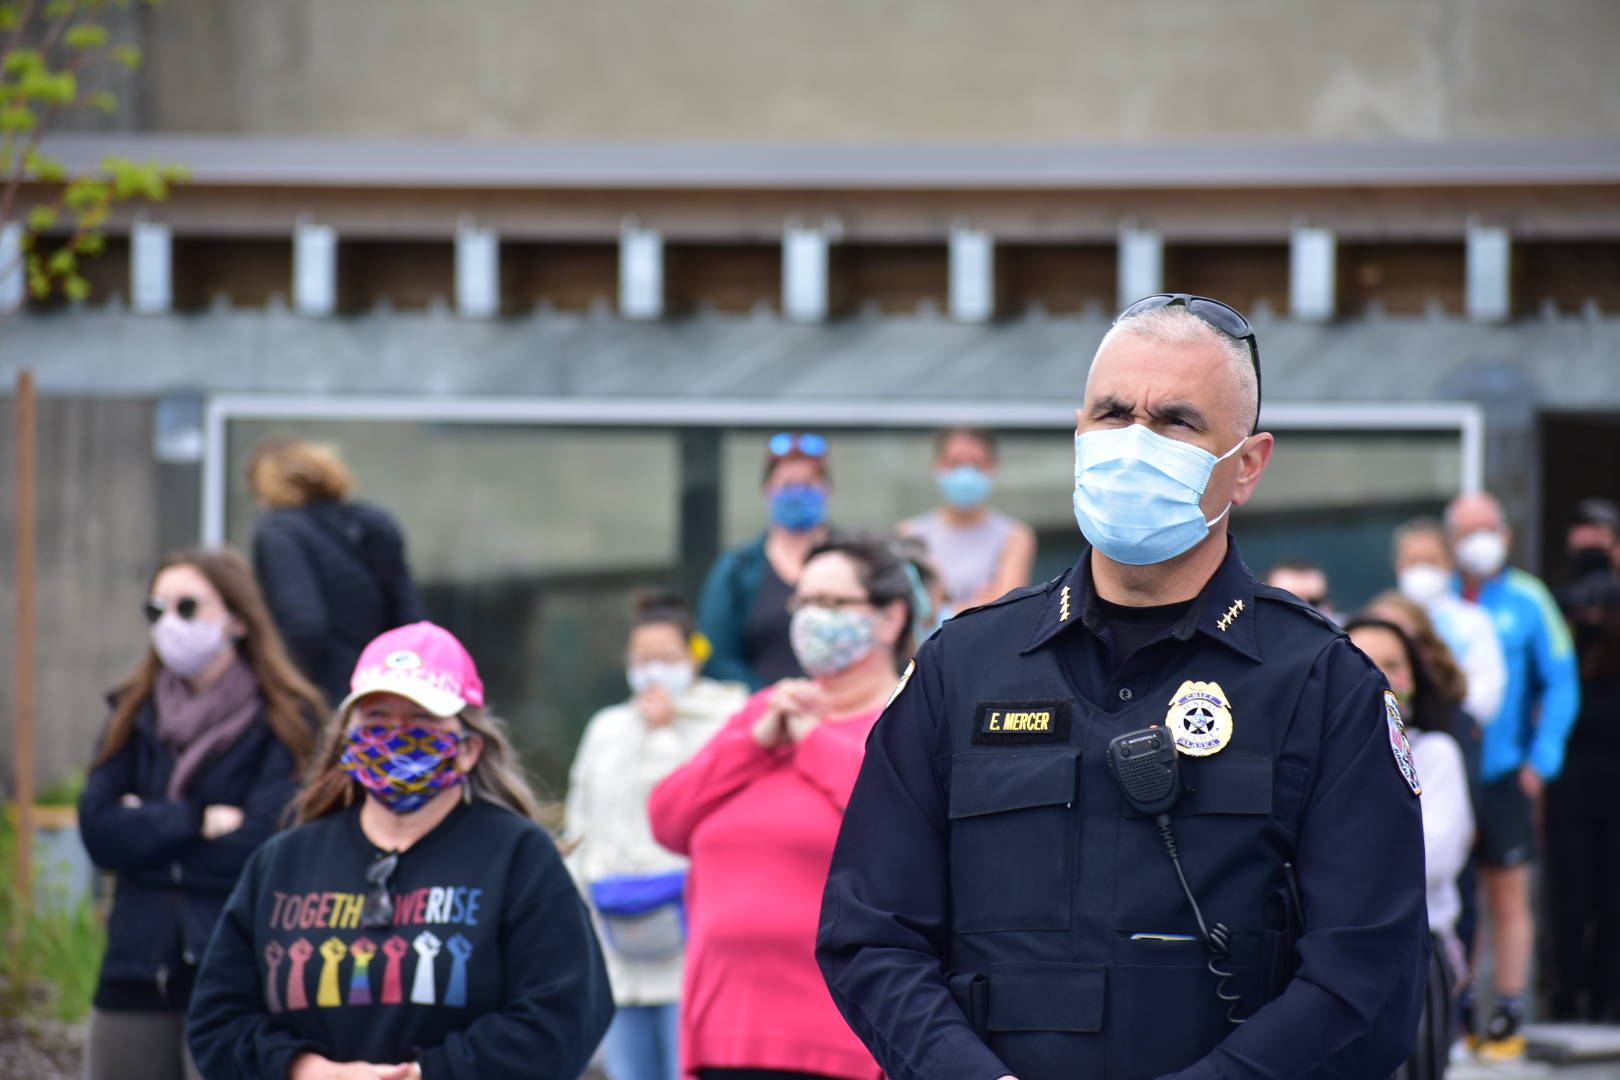 Juneau Police Chief Ed Mercer was among the attendees at the “I Can’t Breathe” vigil held Saturday, May 30 at Mayor Bill Overstreet Park. (Peter Segall | Juneau Empire)